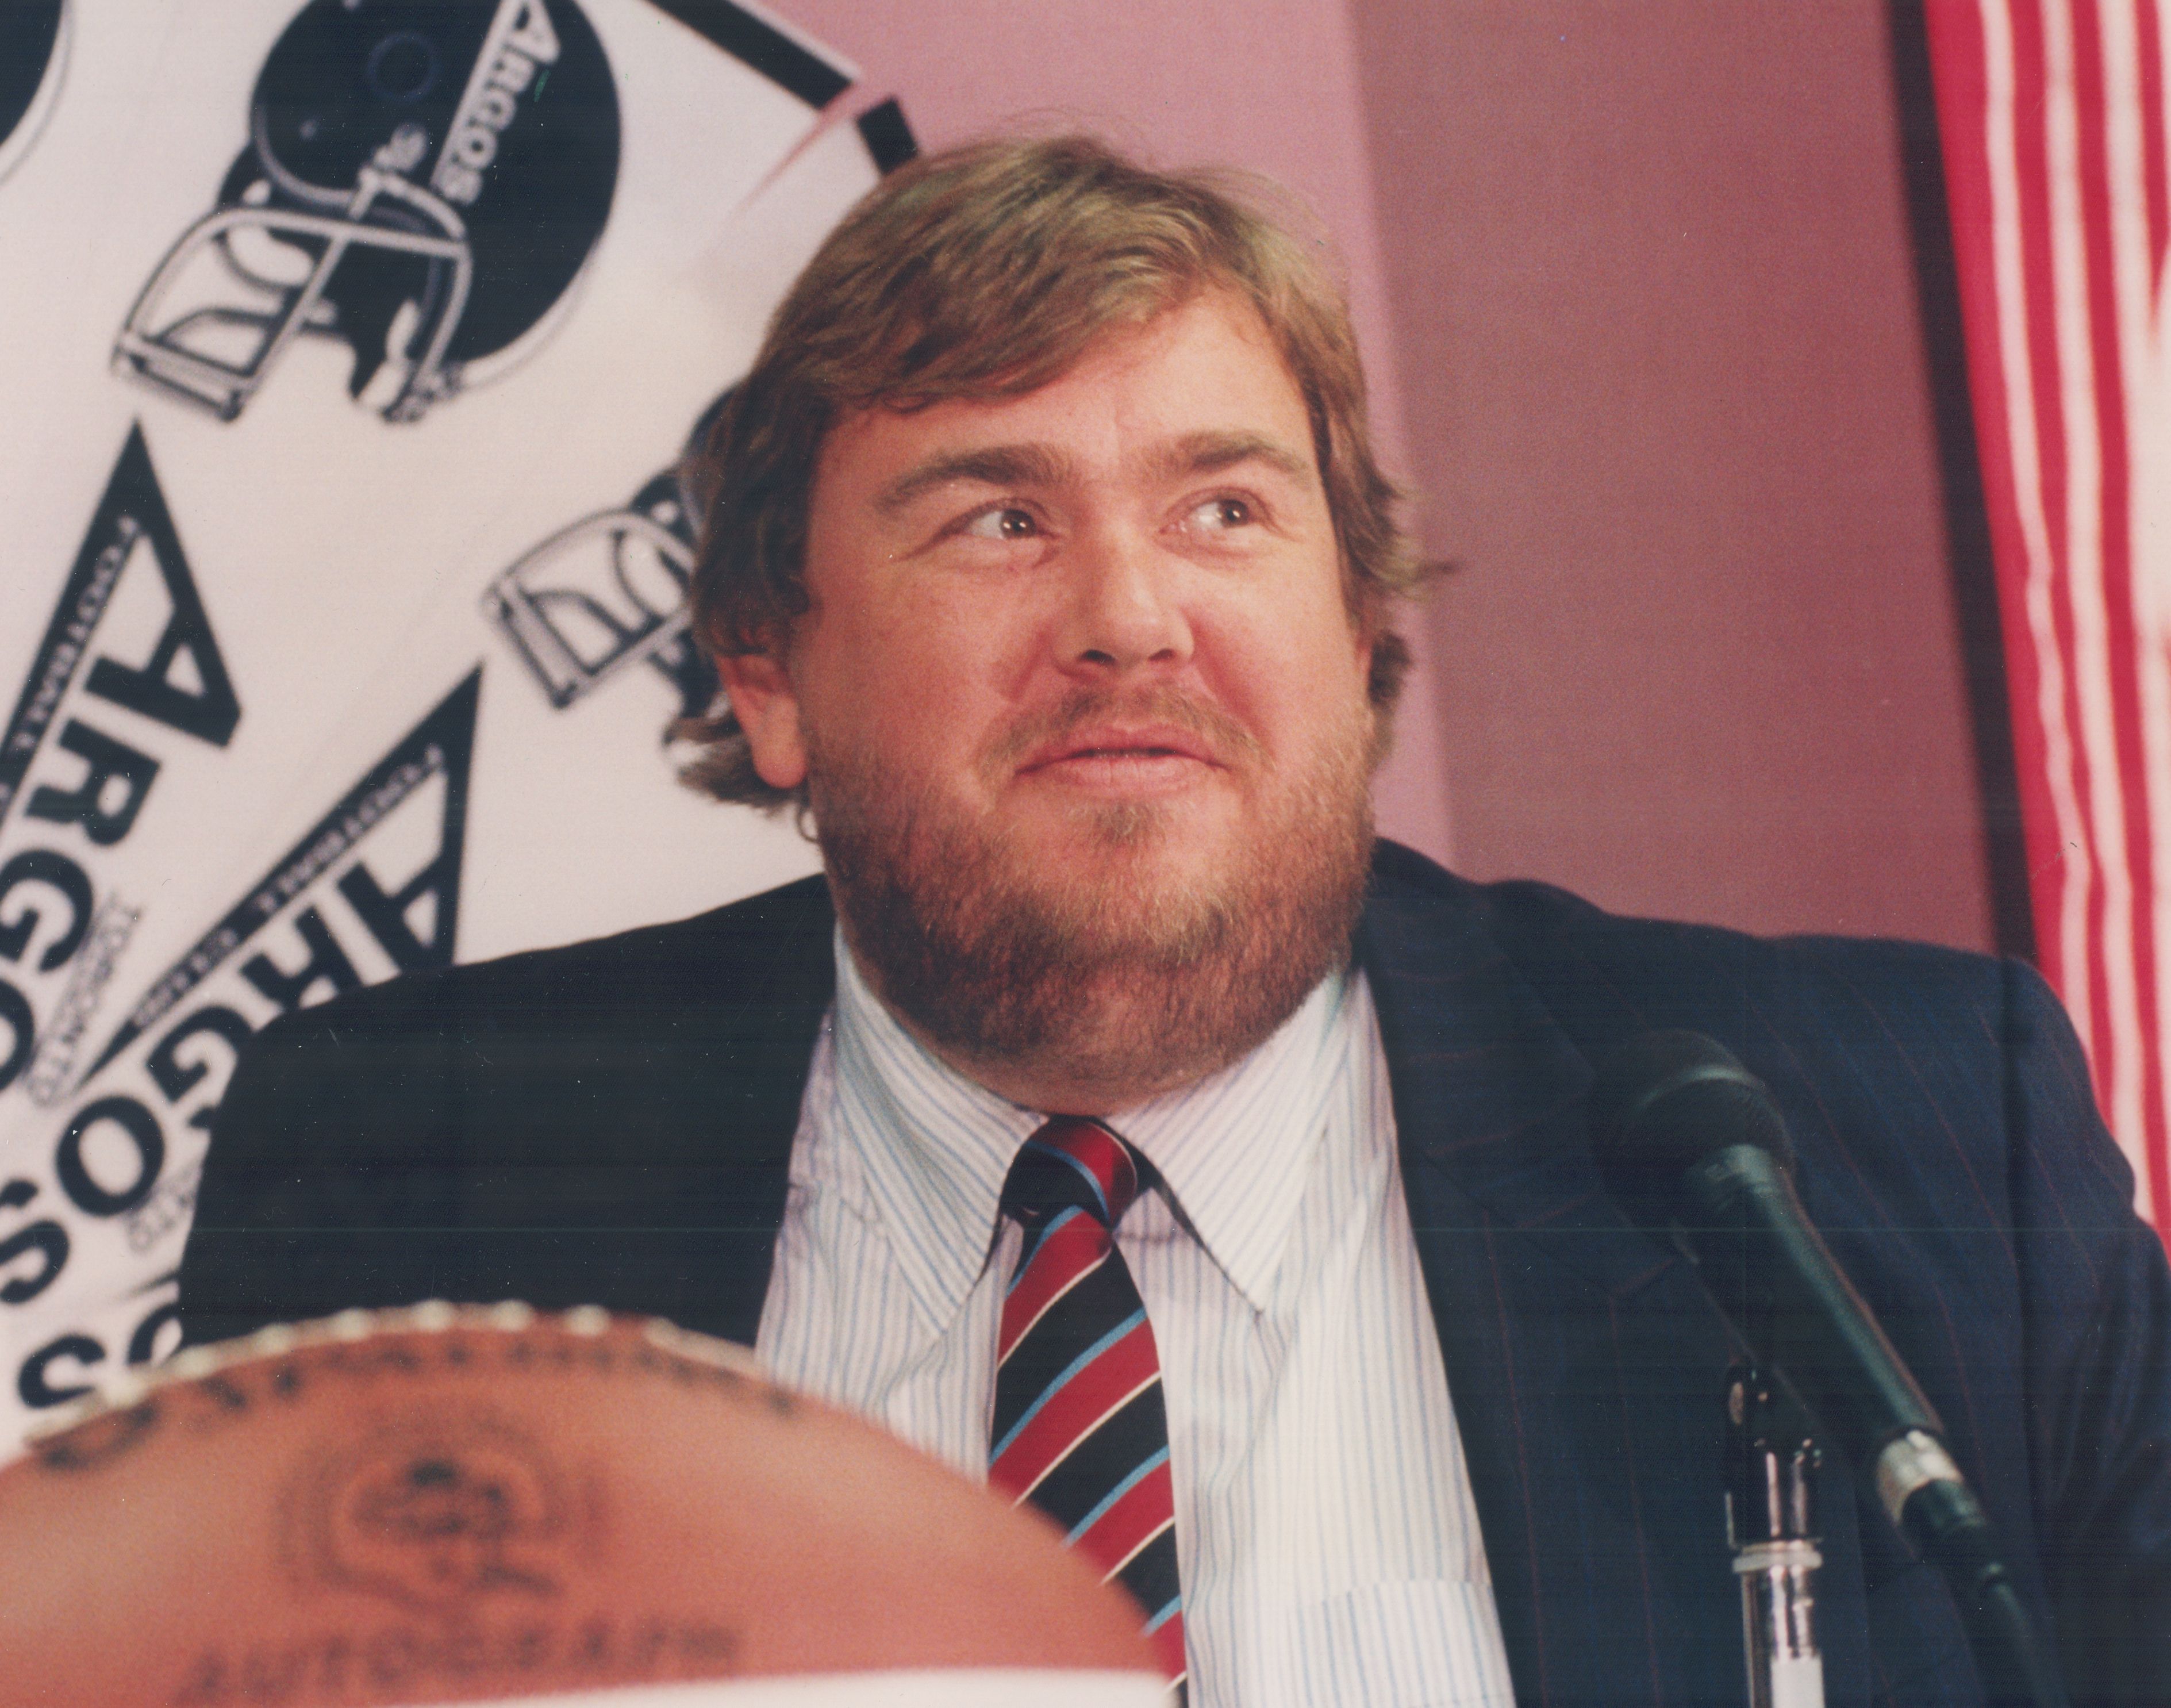 John Candy during a press conference in Canada. | Source: Getty Images